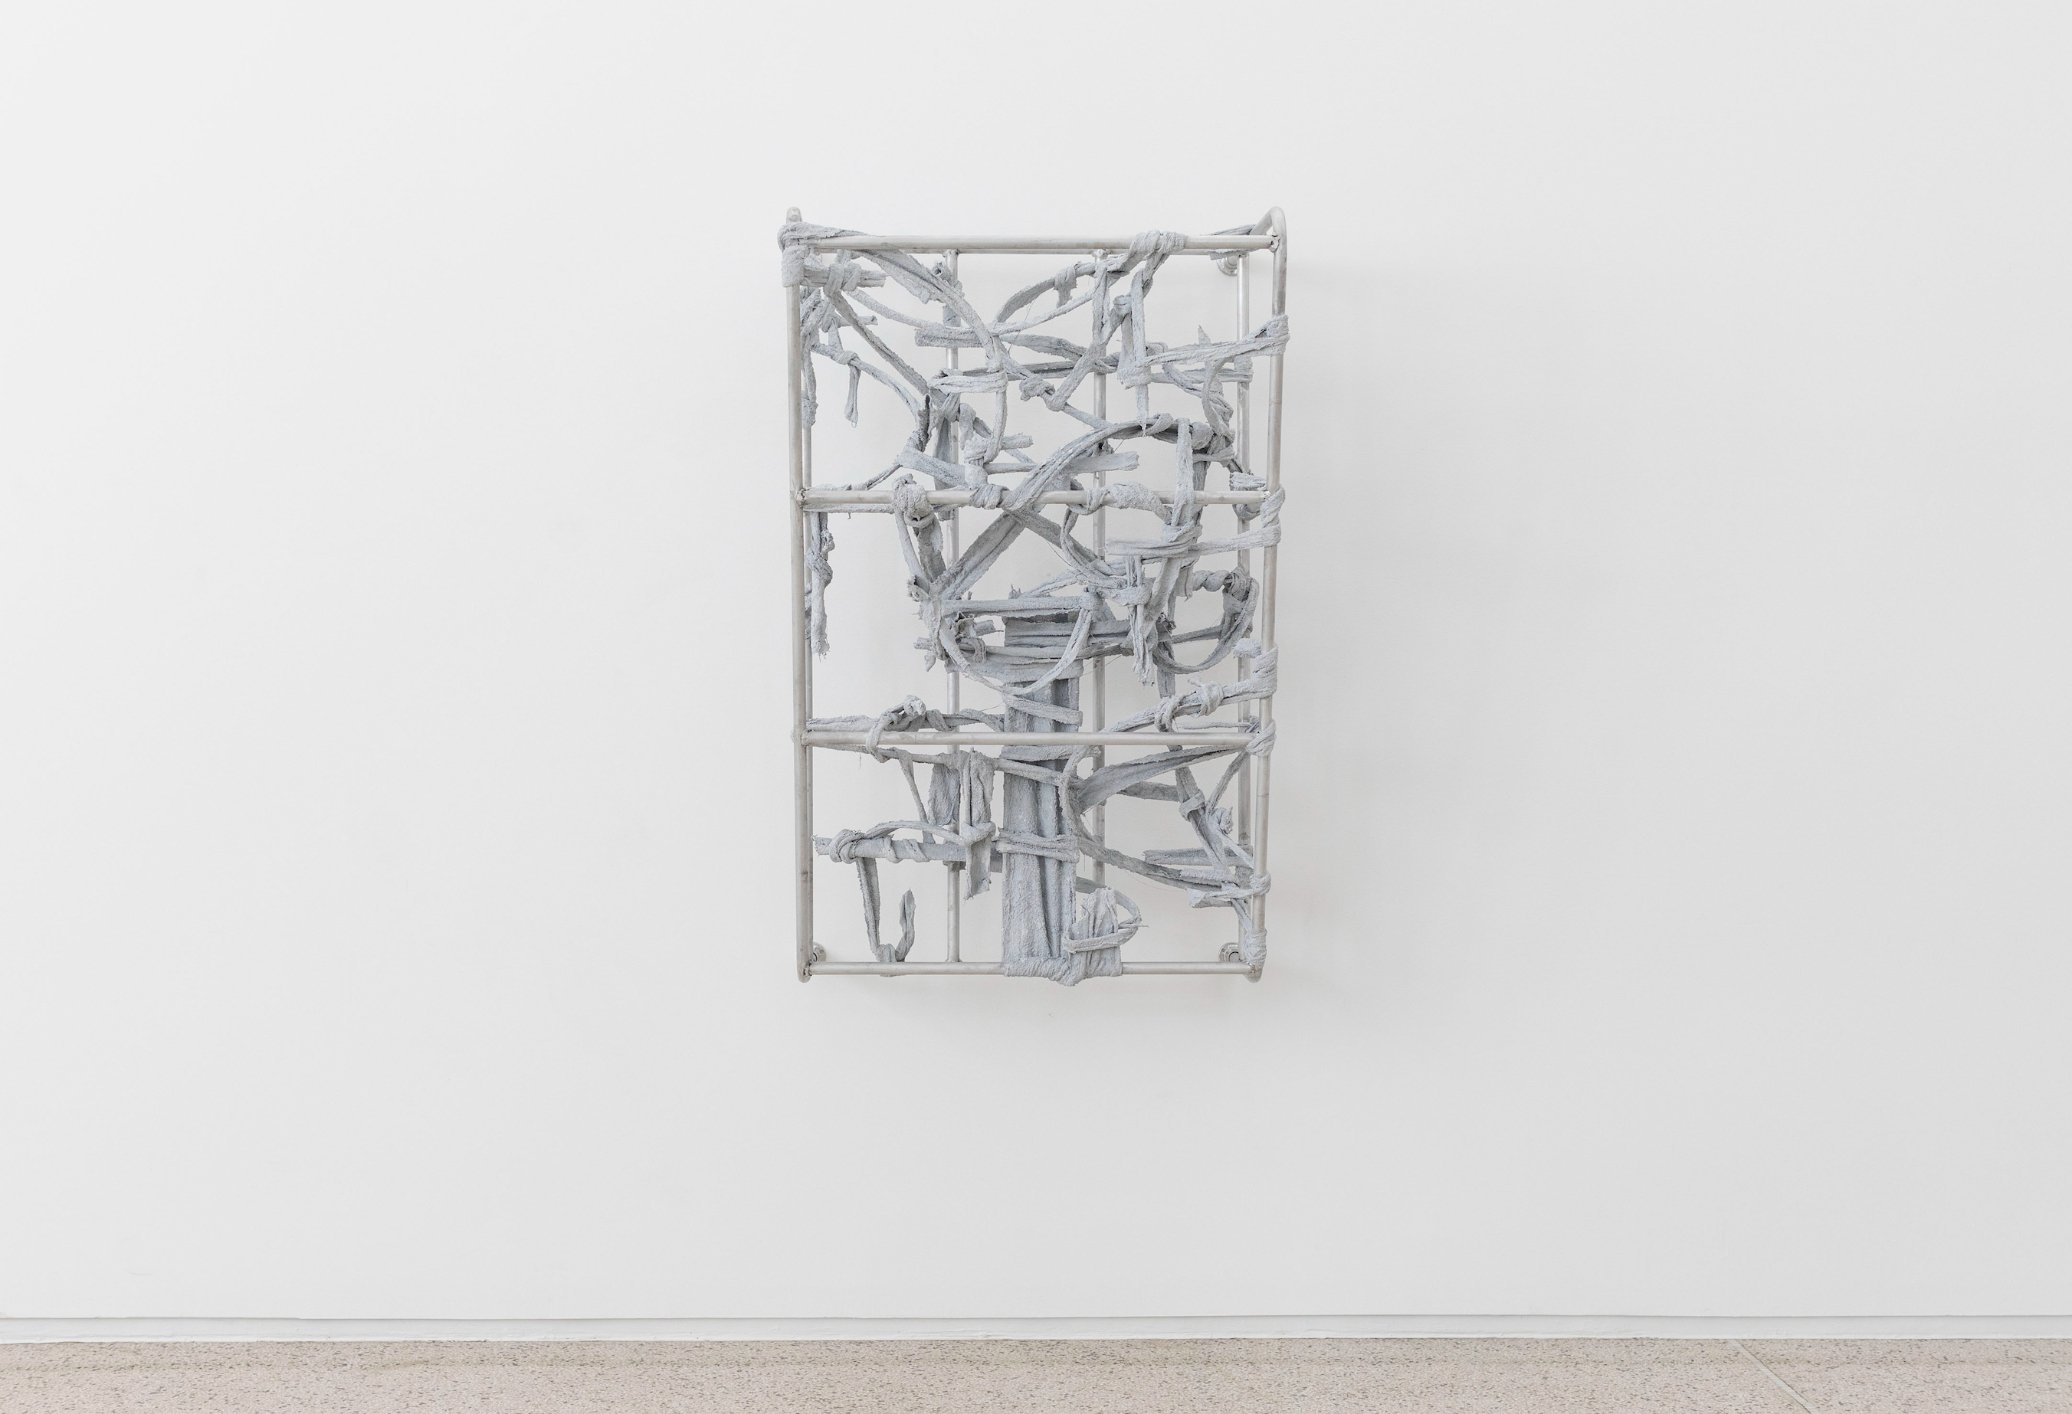  Nikita Gale     RUINER IX  (2021) Aluminum, concrete, terry cloth 156.2 x 96.5 x 88.9 cm 61.5 x 38 x 35 inches (B-NGALE-.23-0001)  © the artist  Courtesy the artist and Petzel, New York  